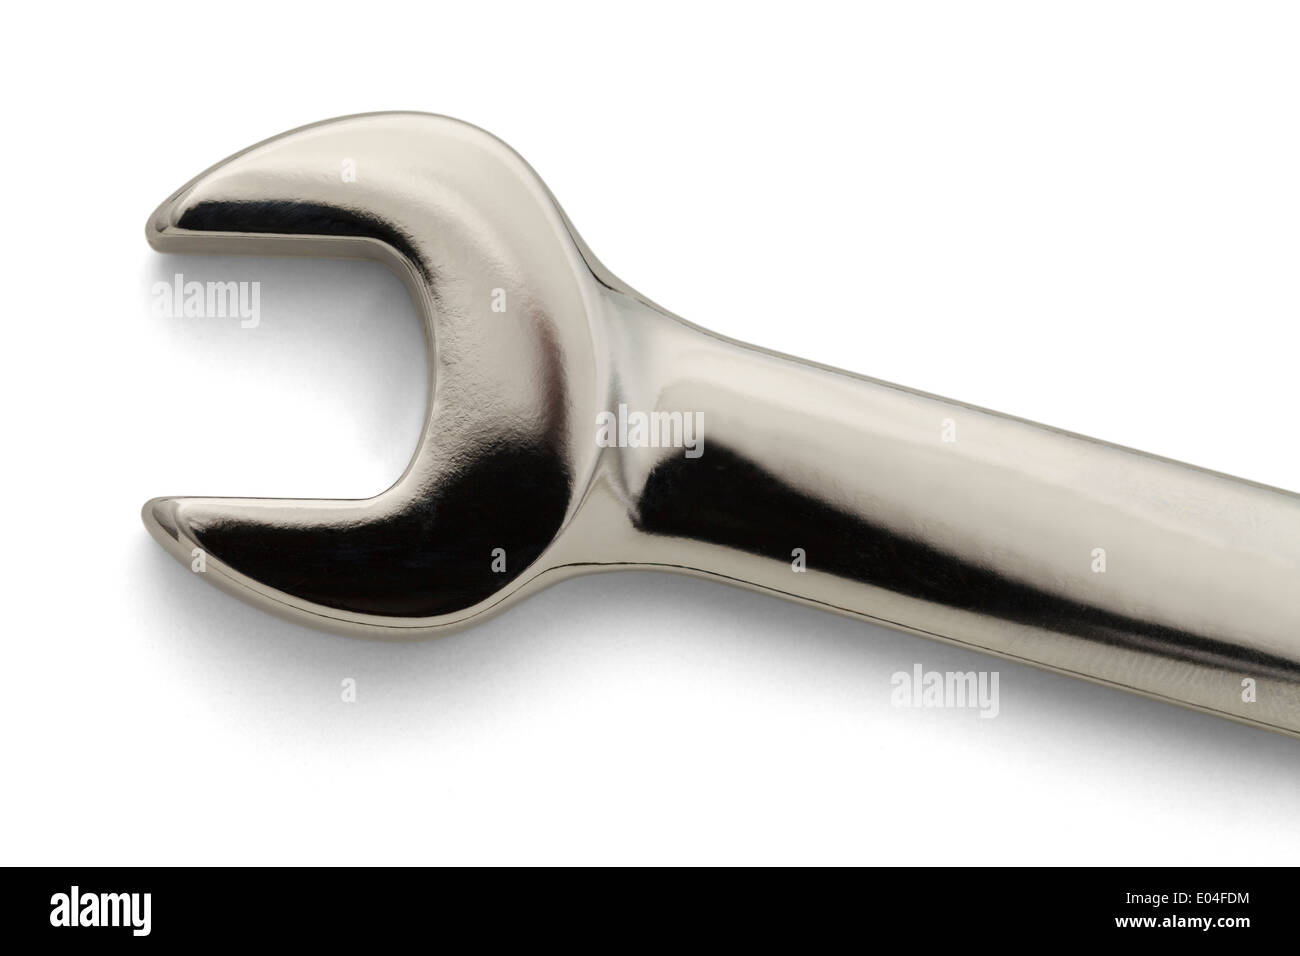 Chrome Cresent Wrench Isolated On White Background. Stock Photo